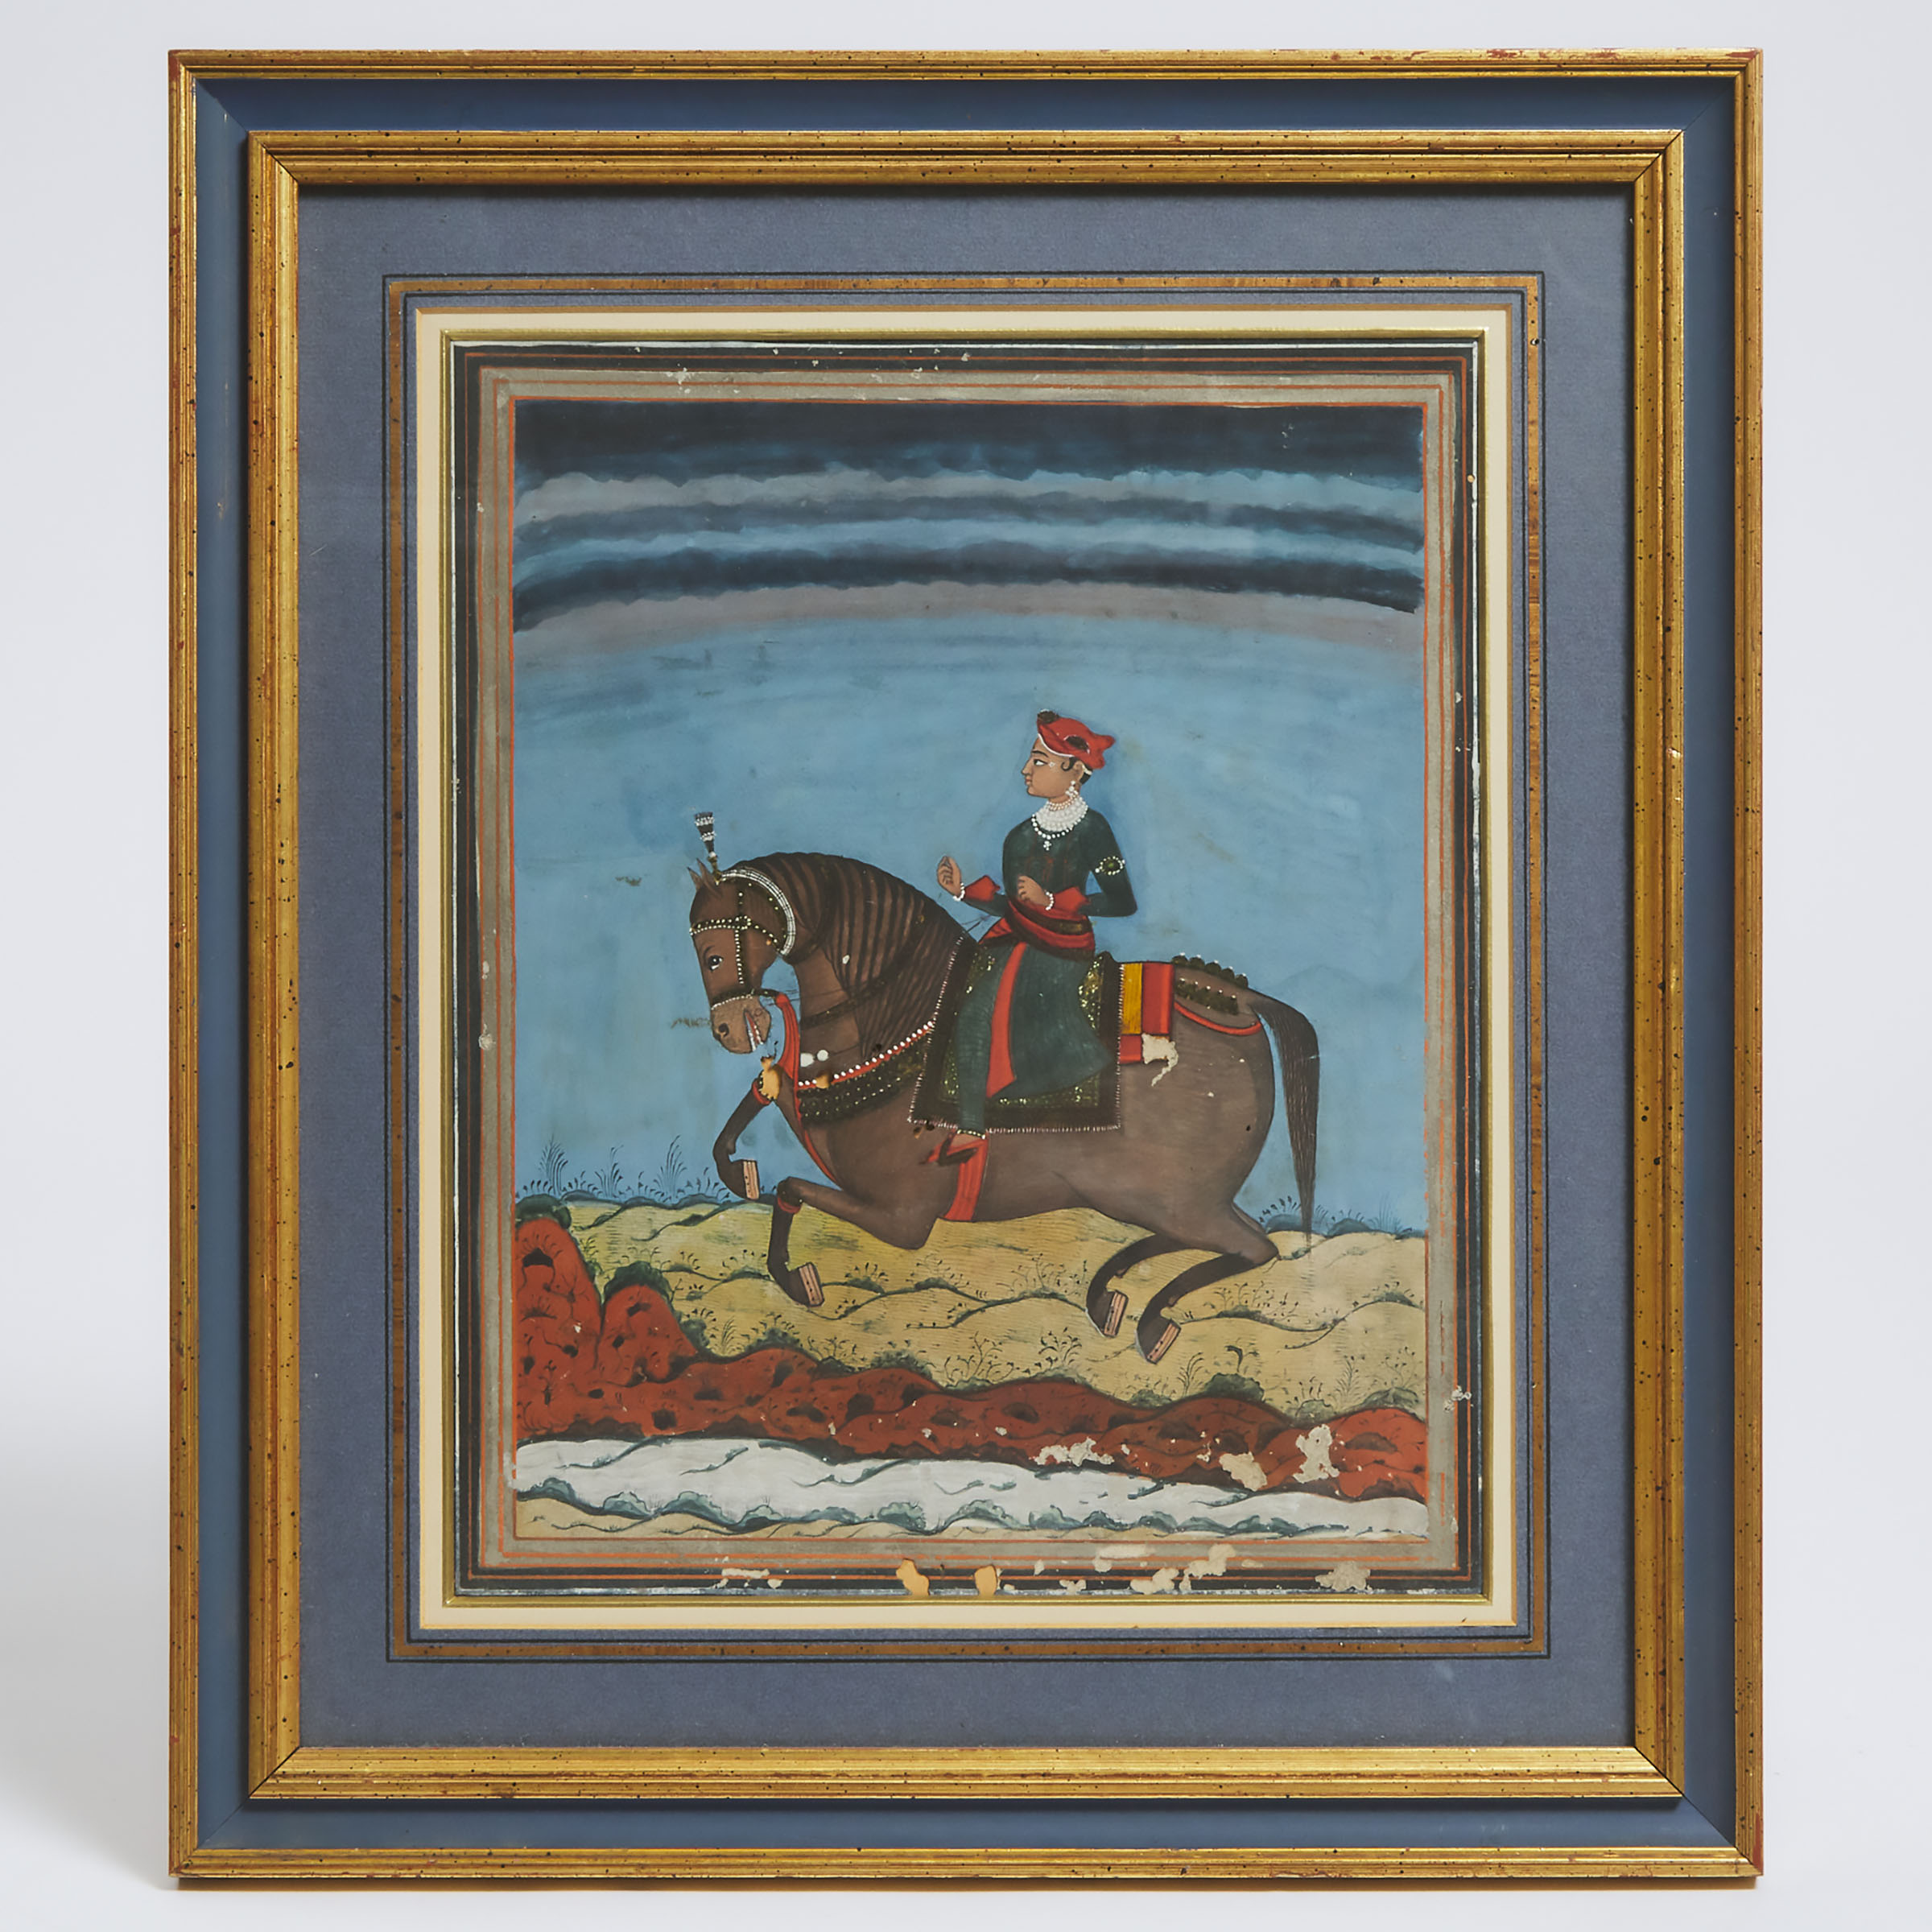 An Indian Equestrian Portrait of a Prince, 18th Century